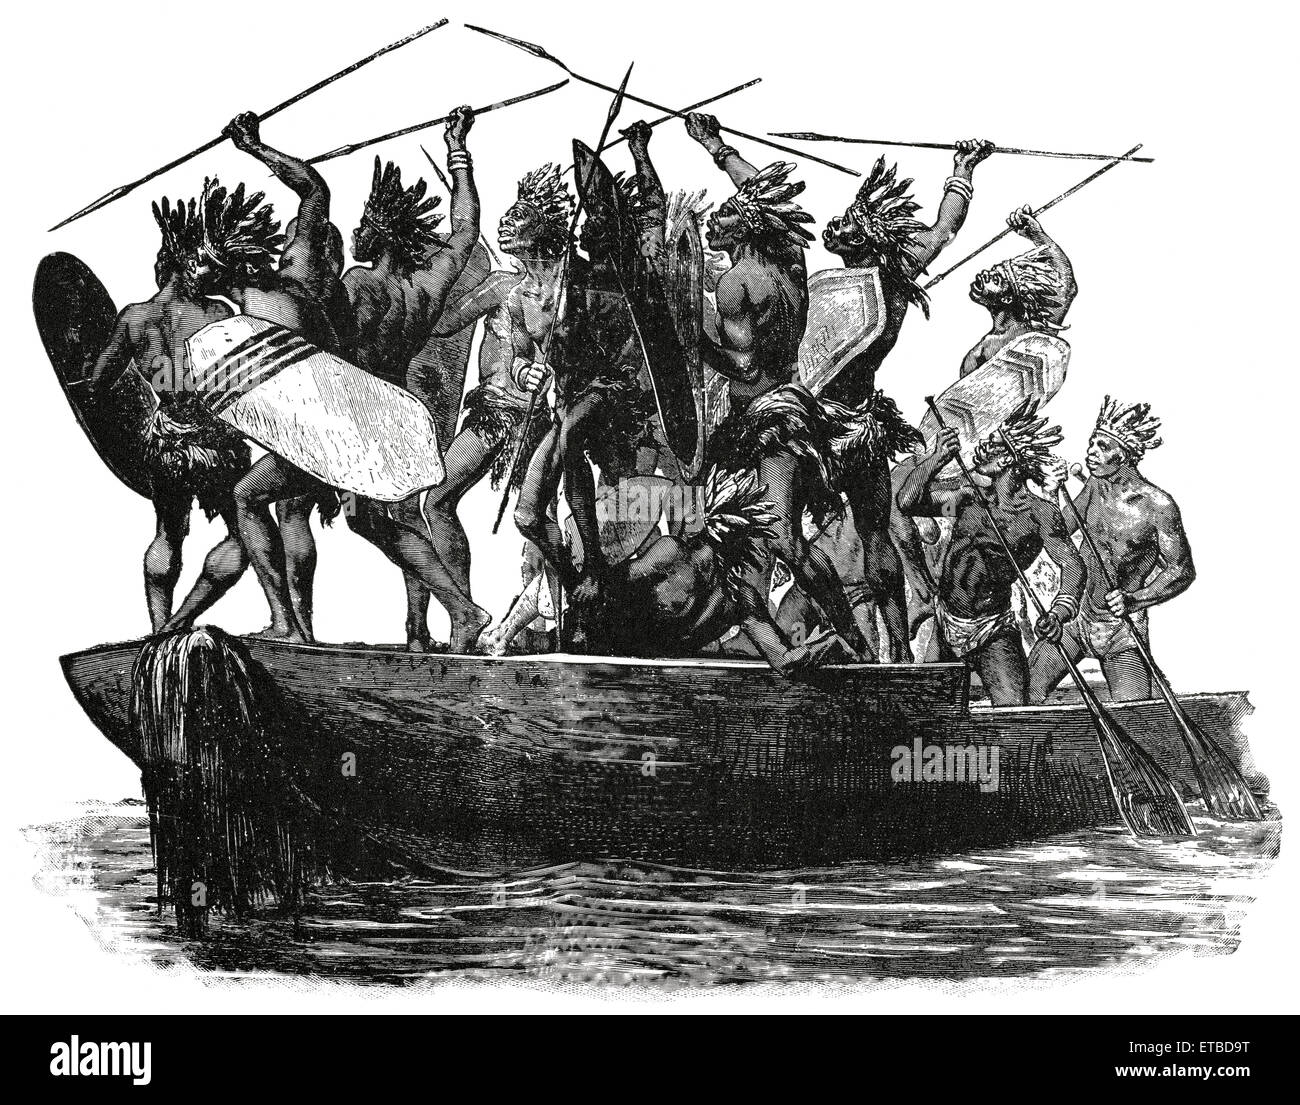 Warriors on War Canoe, Africa, 'Classical Portfolio of Primitive Carriers', by Marshall M. Kirman, World Railway Publ. Co., Illustration, 1895 Stock Photo